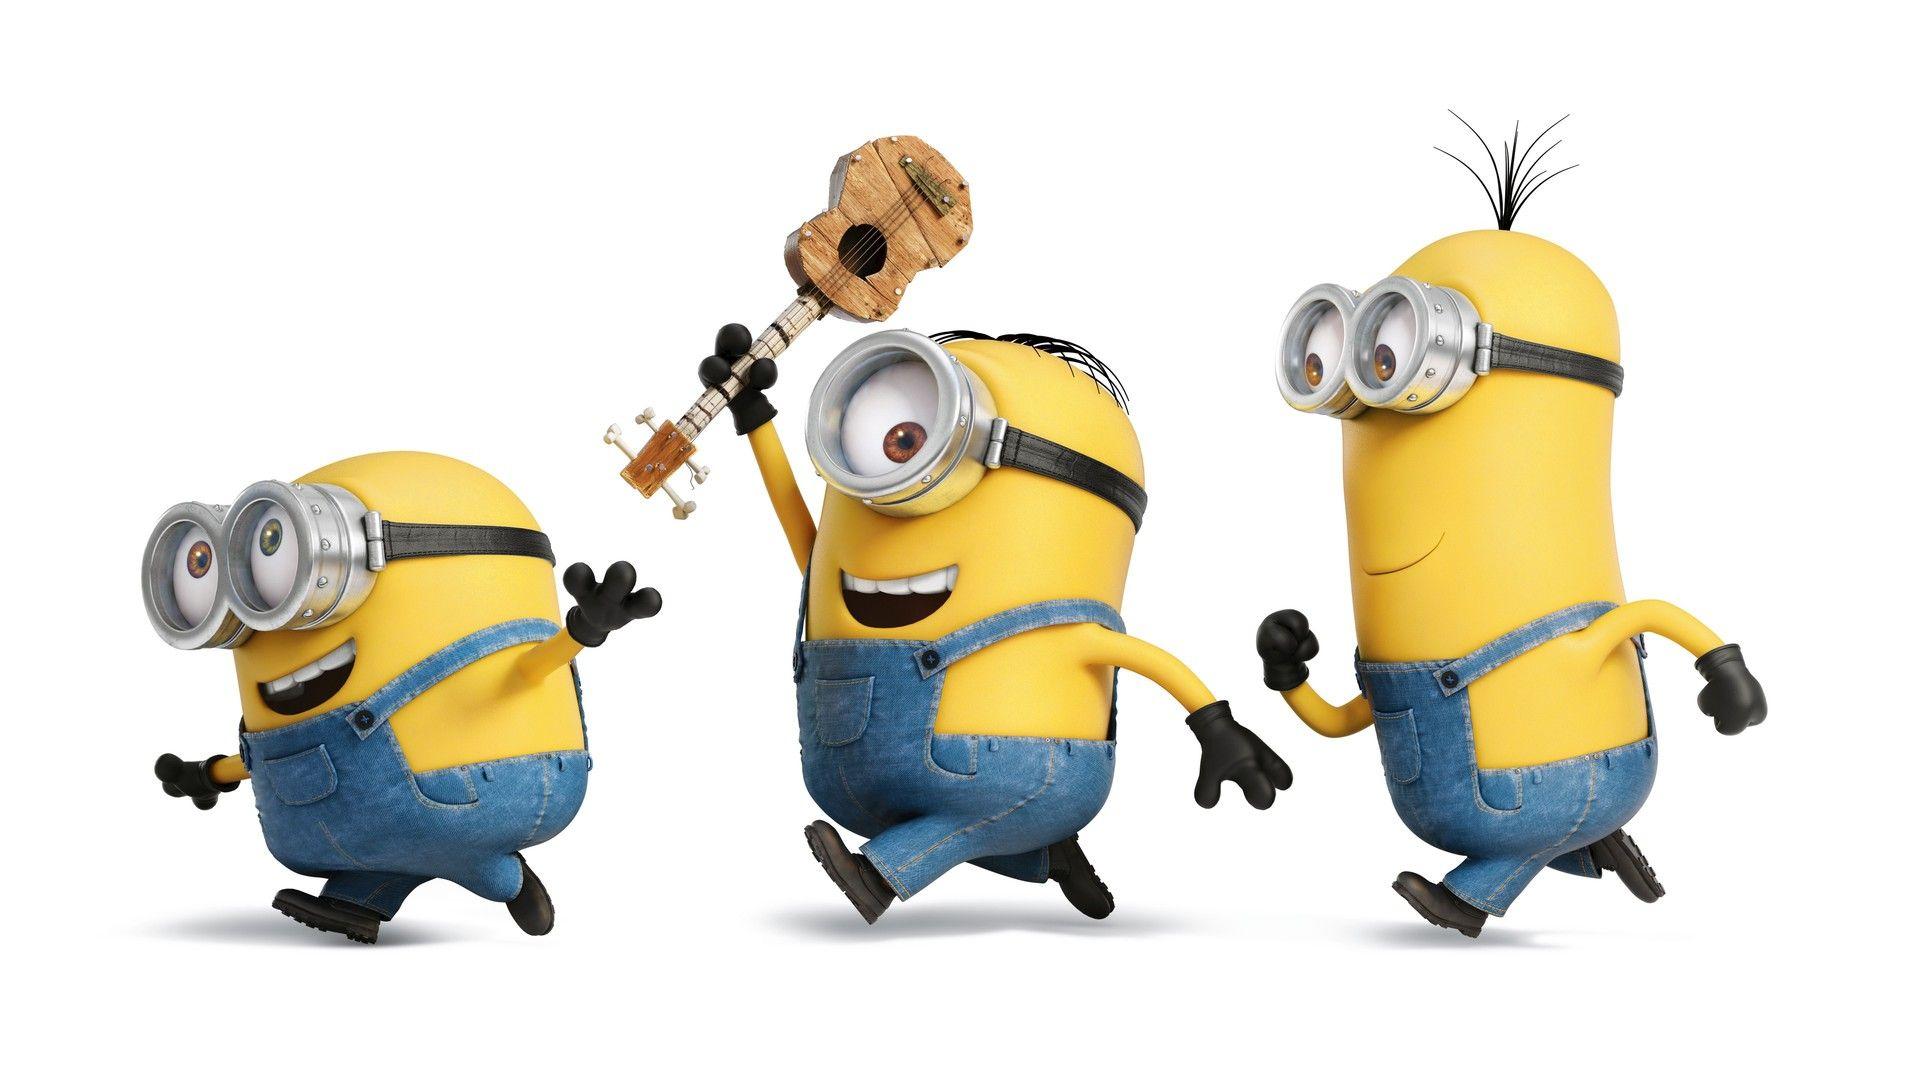 Minion Wallpapers For Laptop - Wallpaper Cave